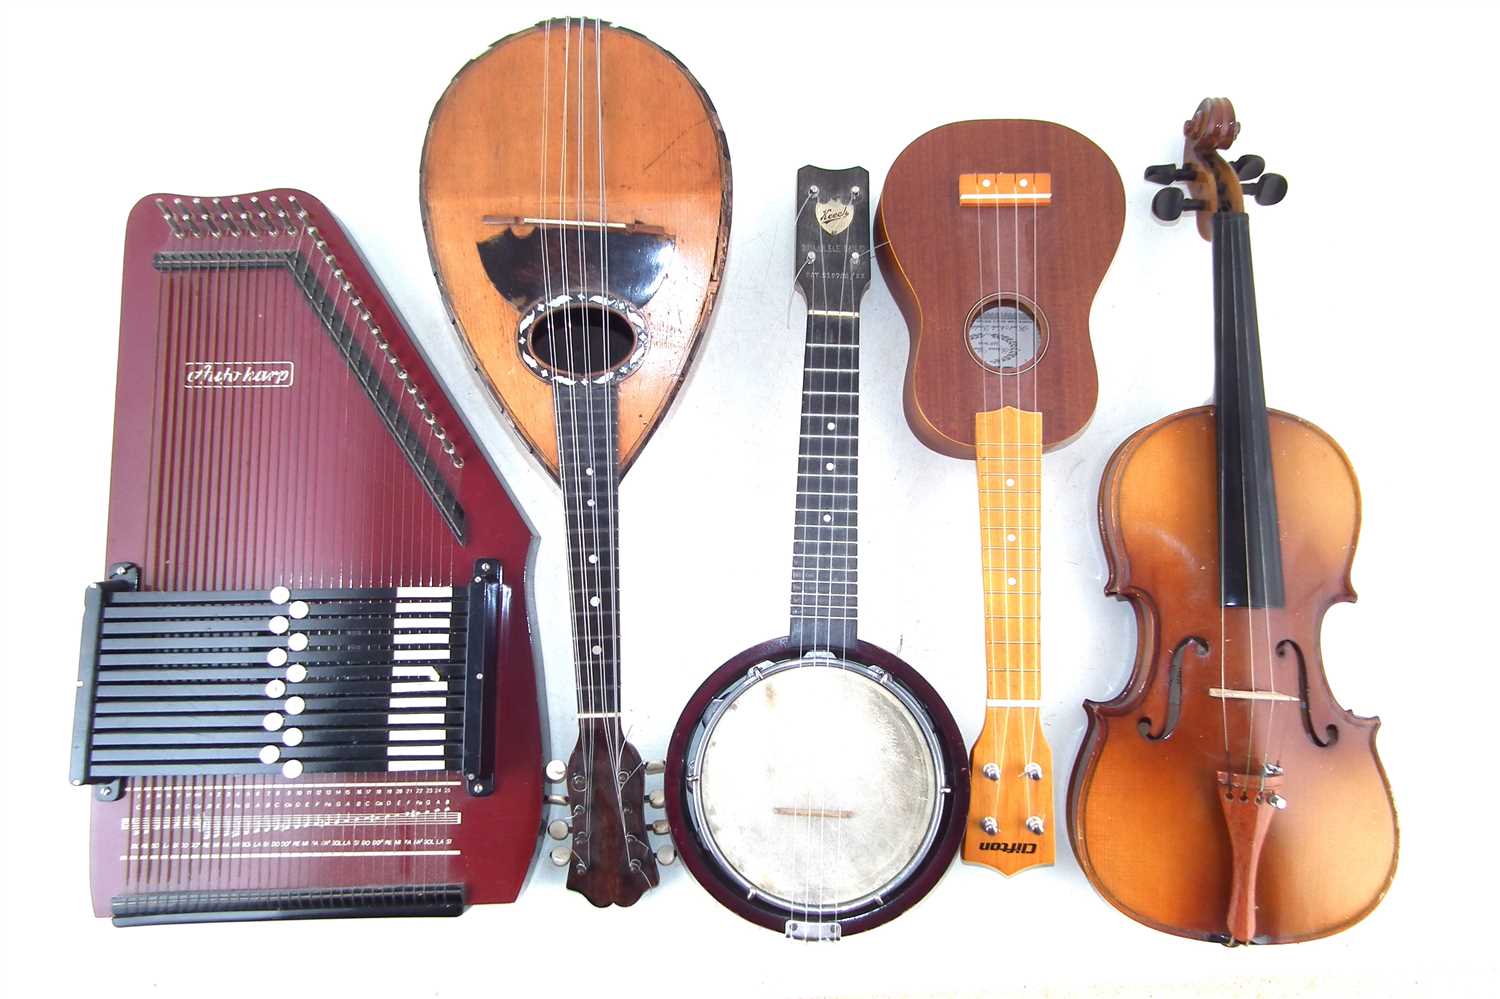 Lot 107 - Collection of instruments